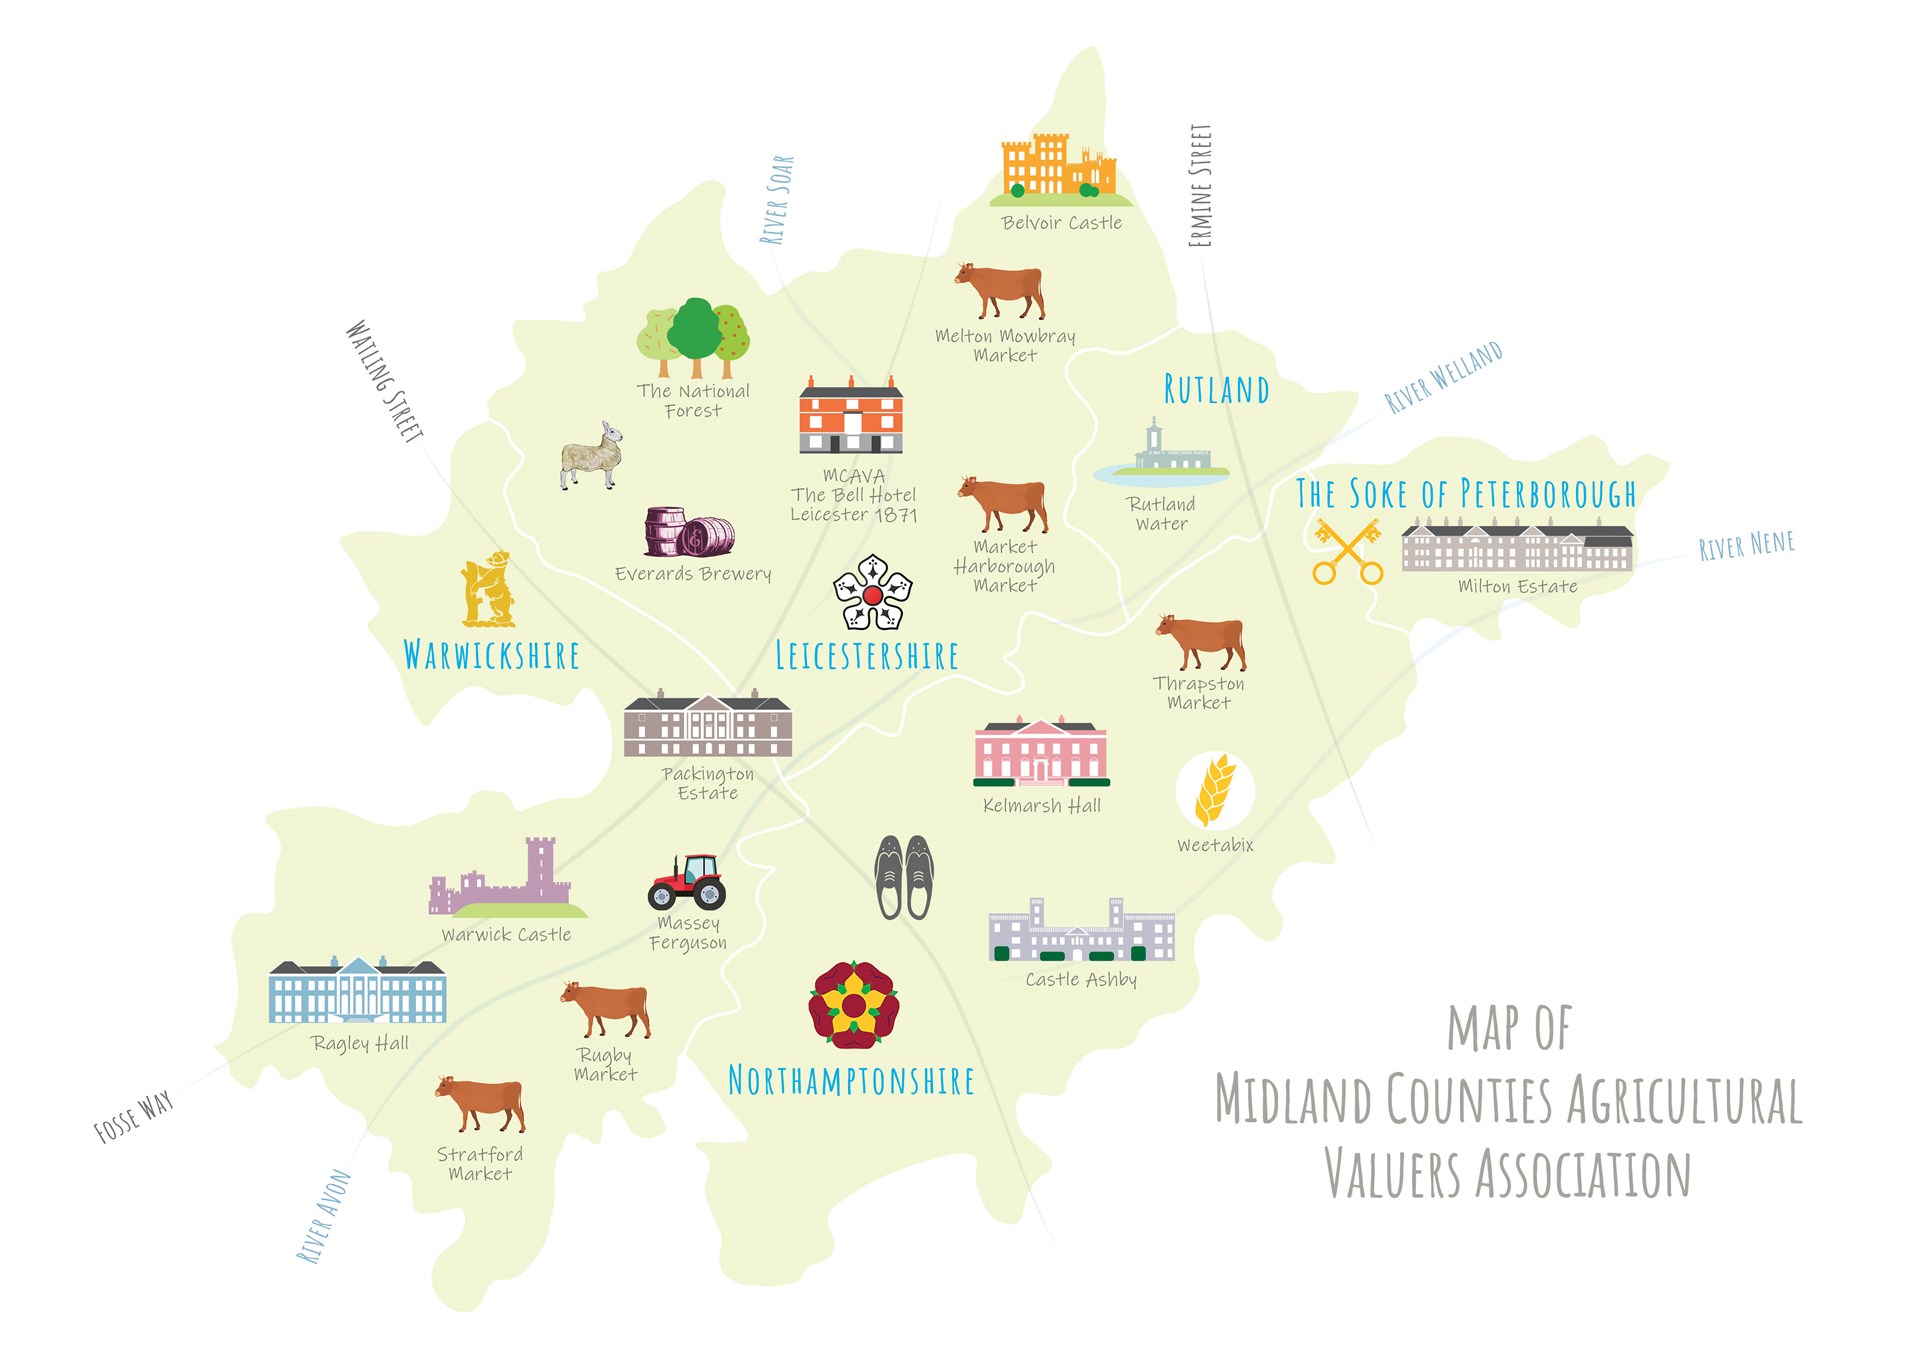 Midland Counties Agricultural Valuers' Association Diary of Events 2021